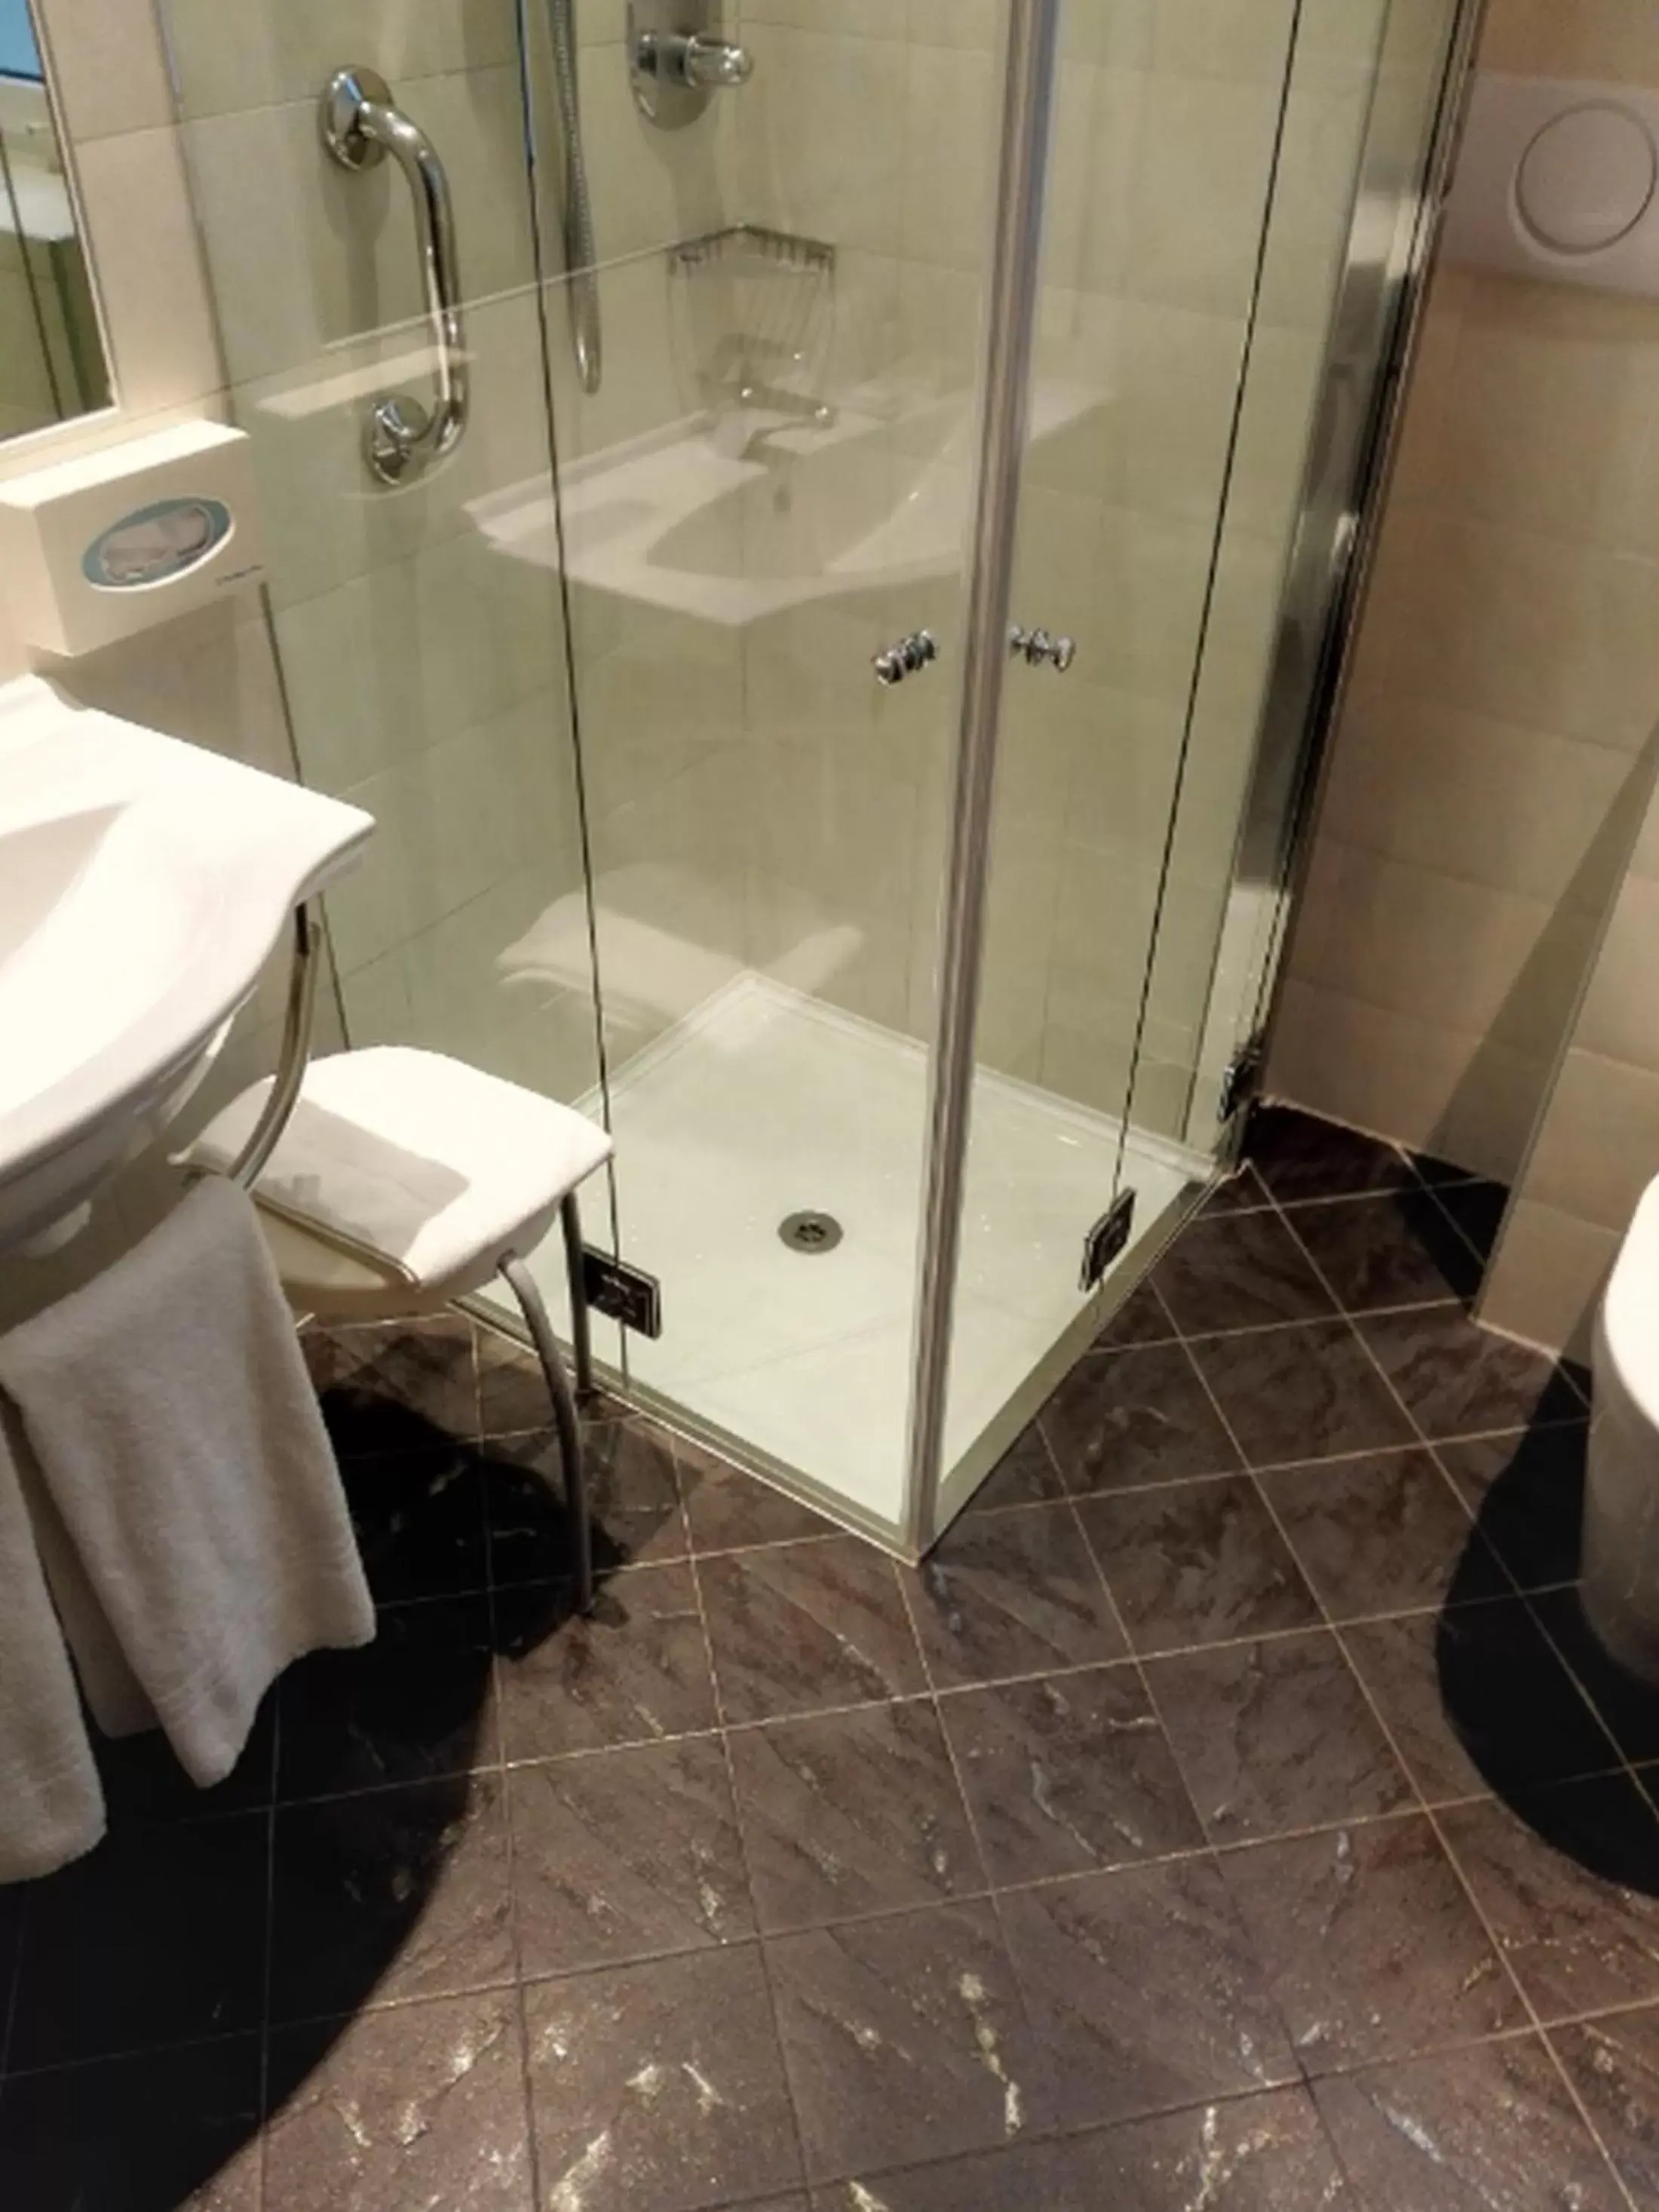 Facility for disabled guests, Bathroom in Card International Hotel